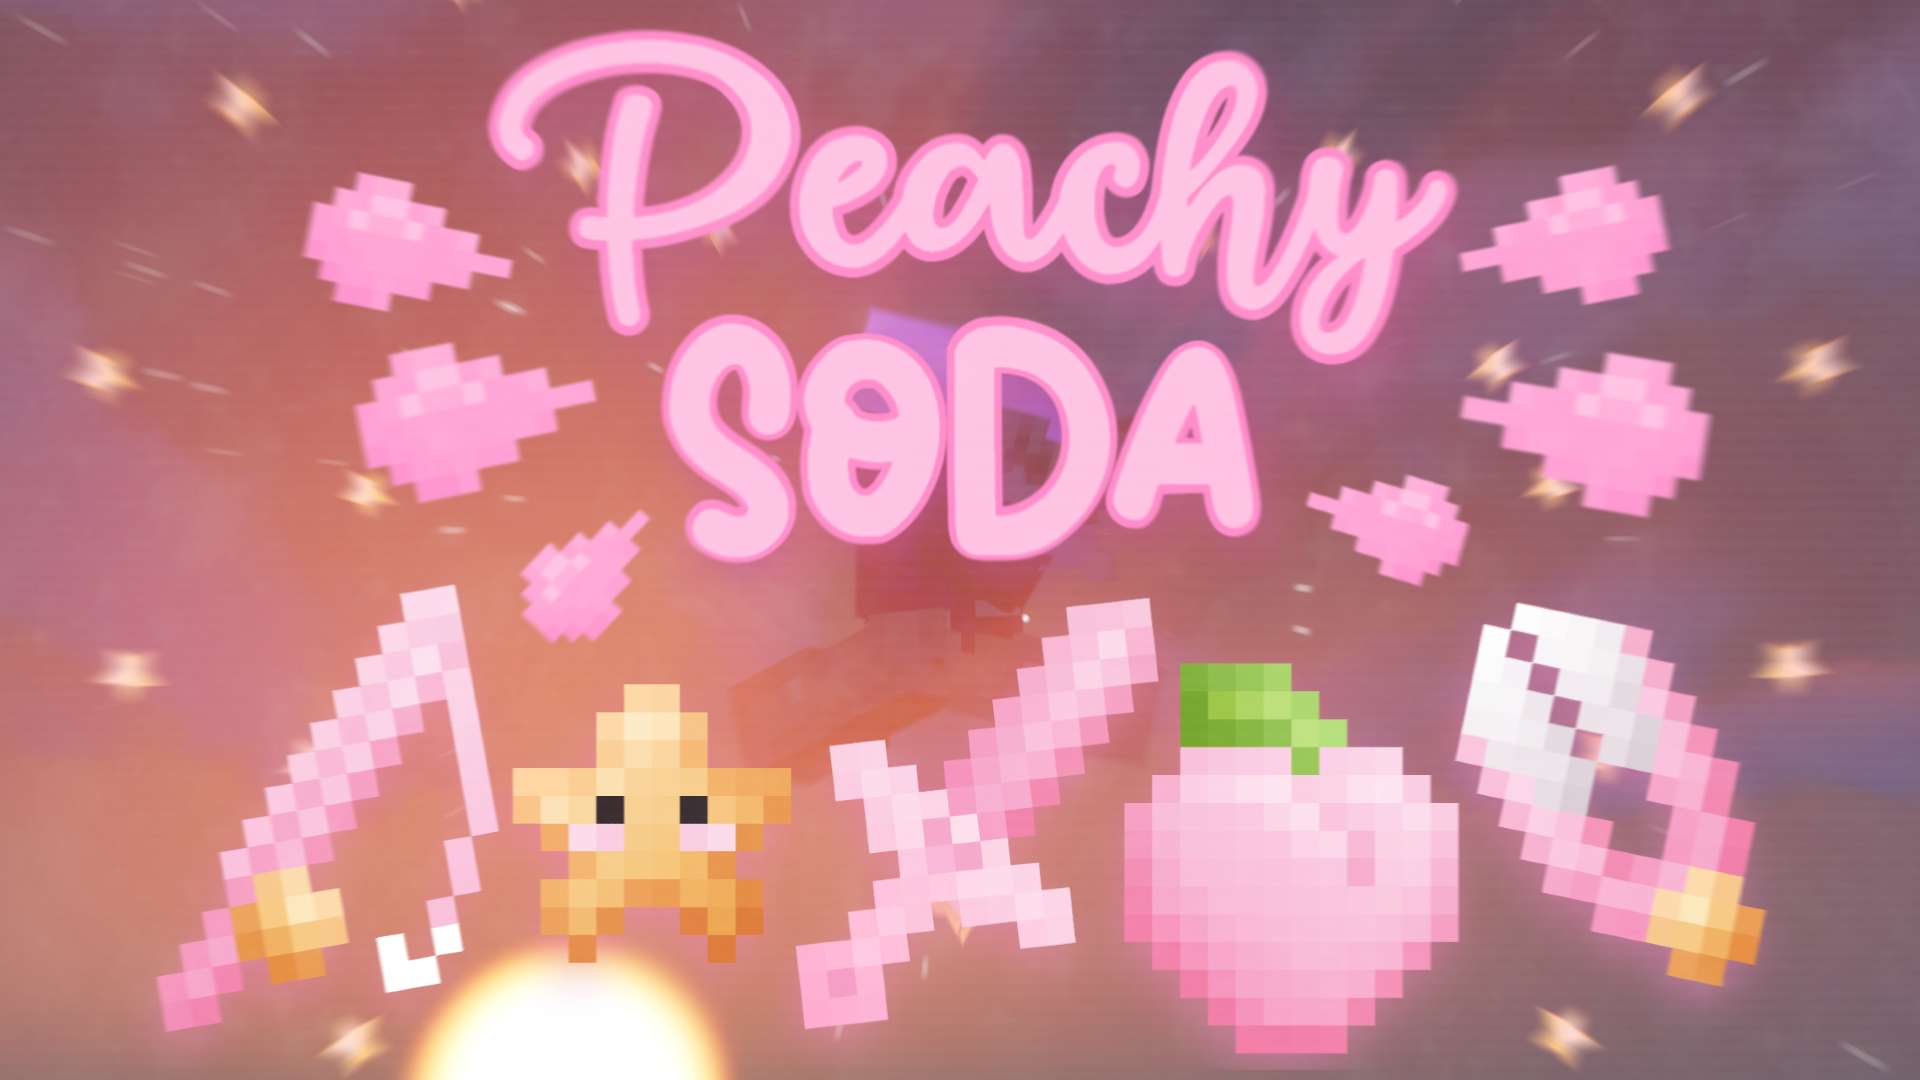 Peachy Soda 16x by Juuliet on PvPRP